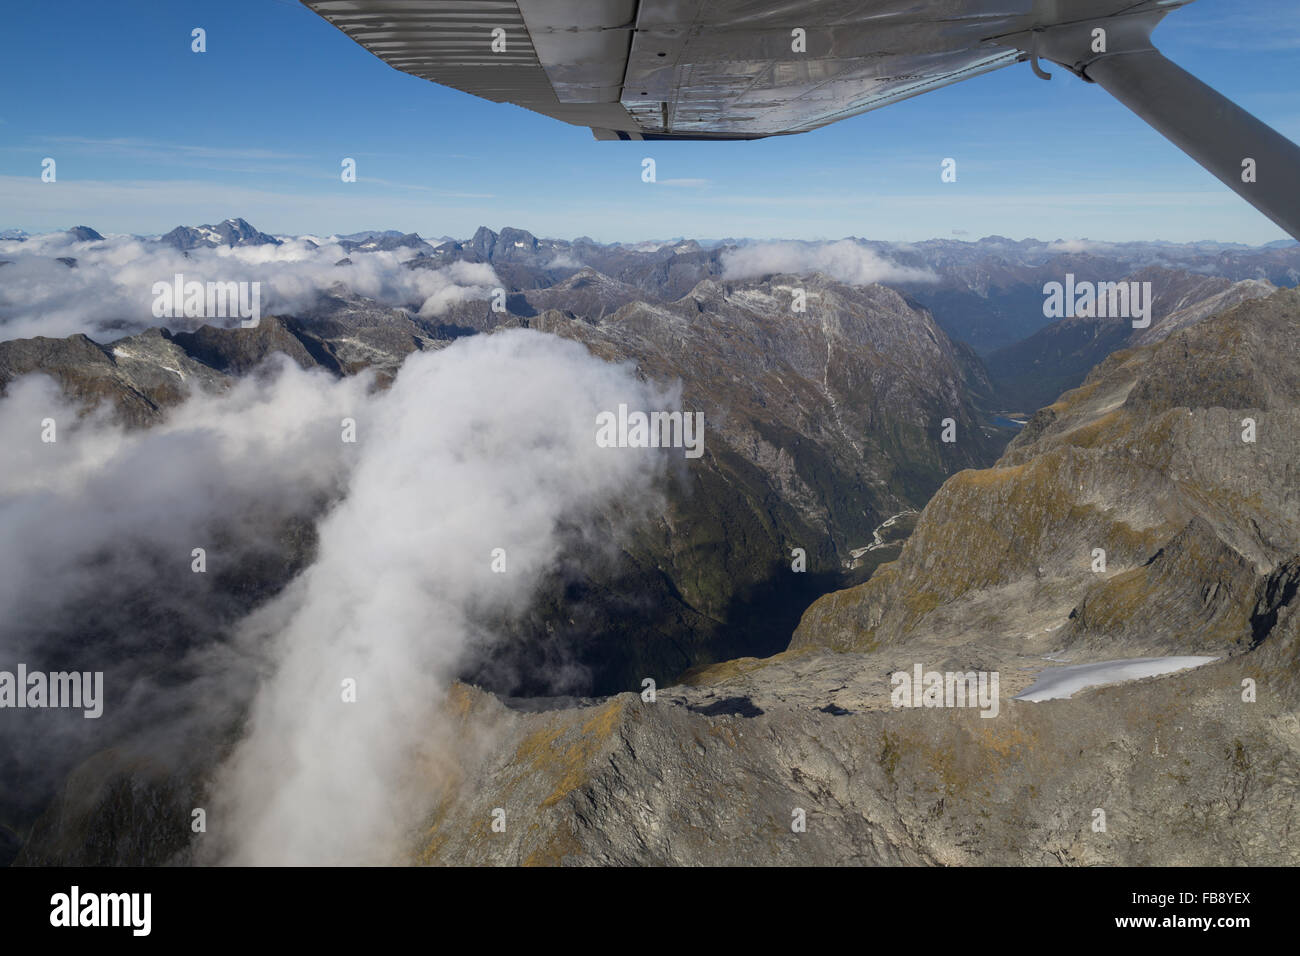 Aerial view of the mountains of Mount Aspiring National Park on the South Island in New Zealand. Stock Photo